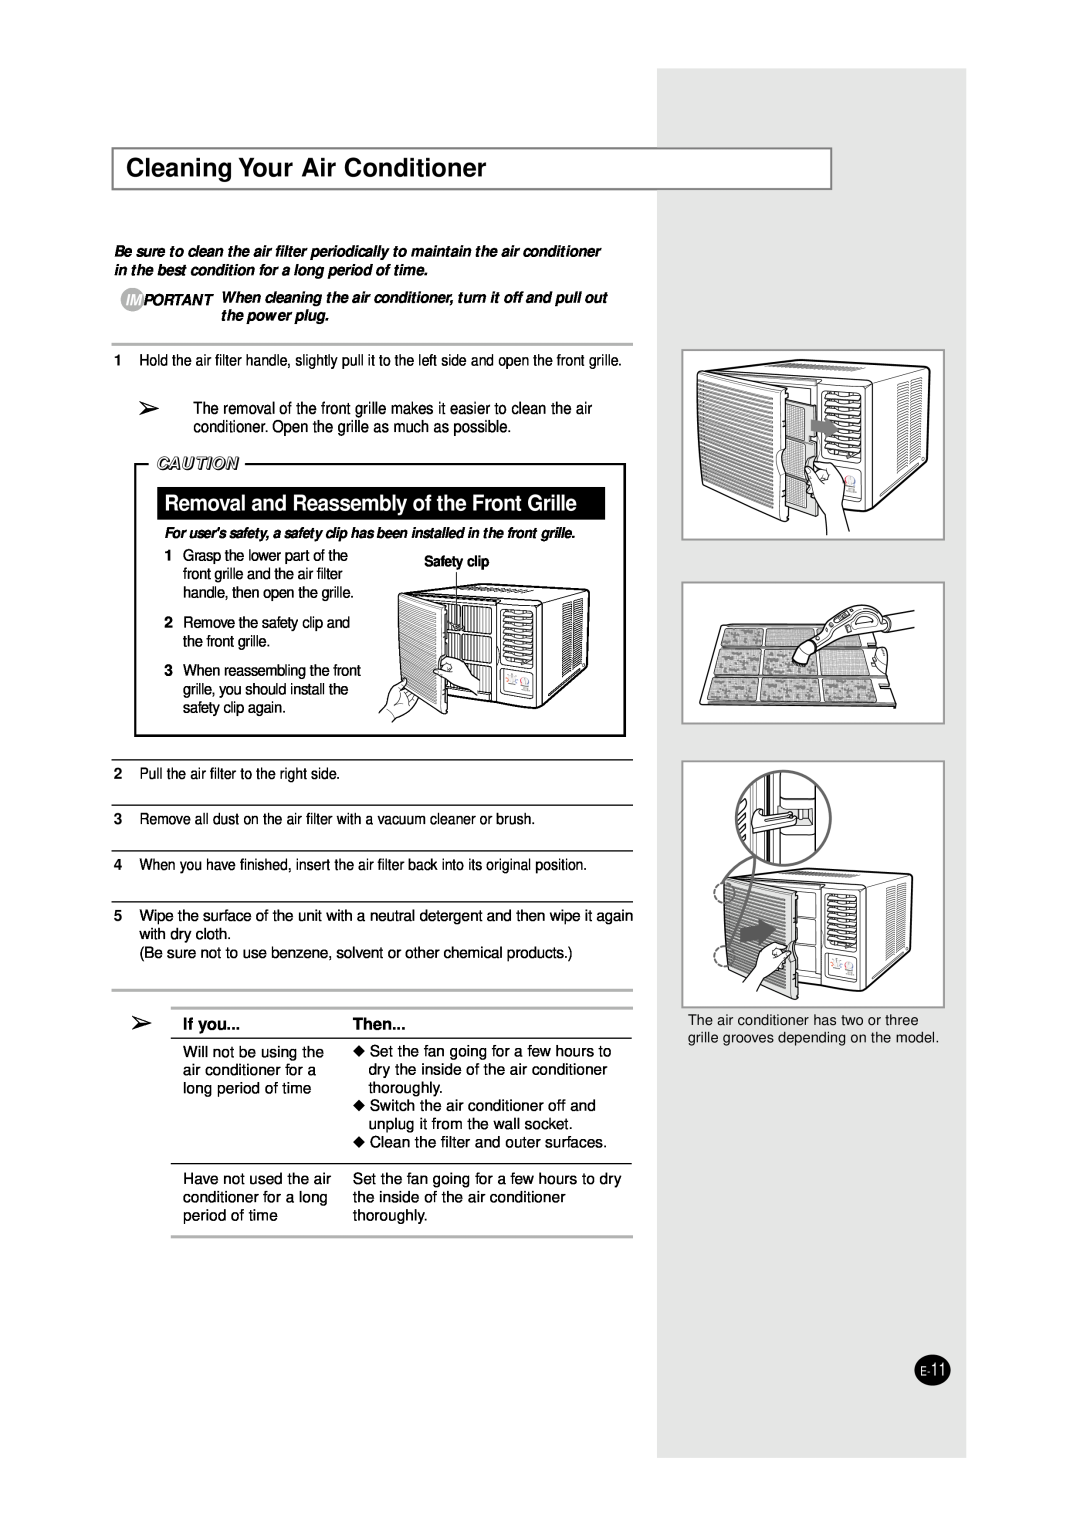 Samsung AZ09F1KE manual Cleaning Your Air Conditioner, Removal and Reassembly of the Front Grille, If you, Then 